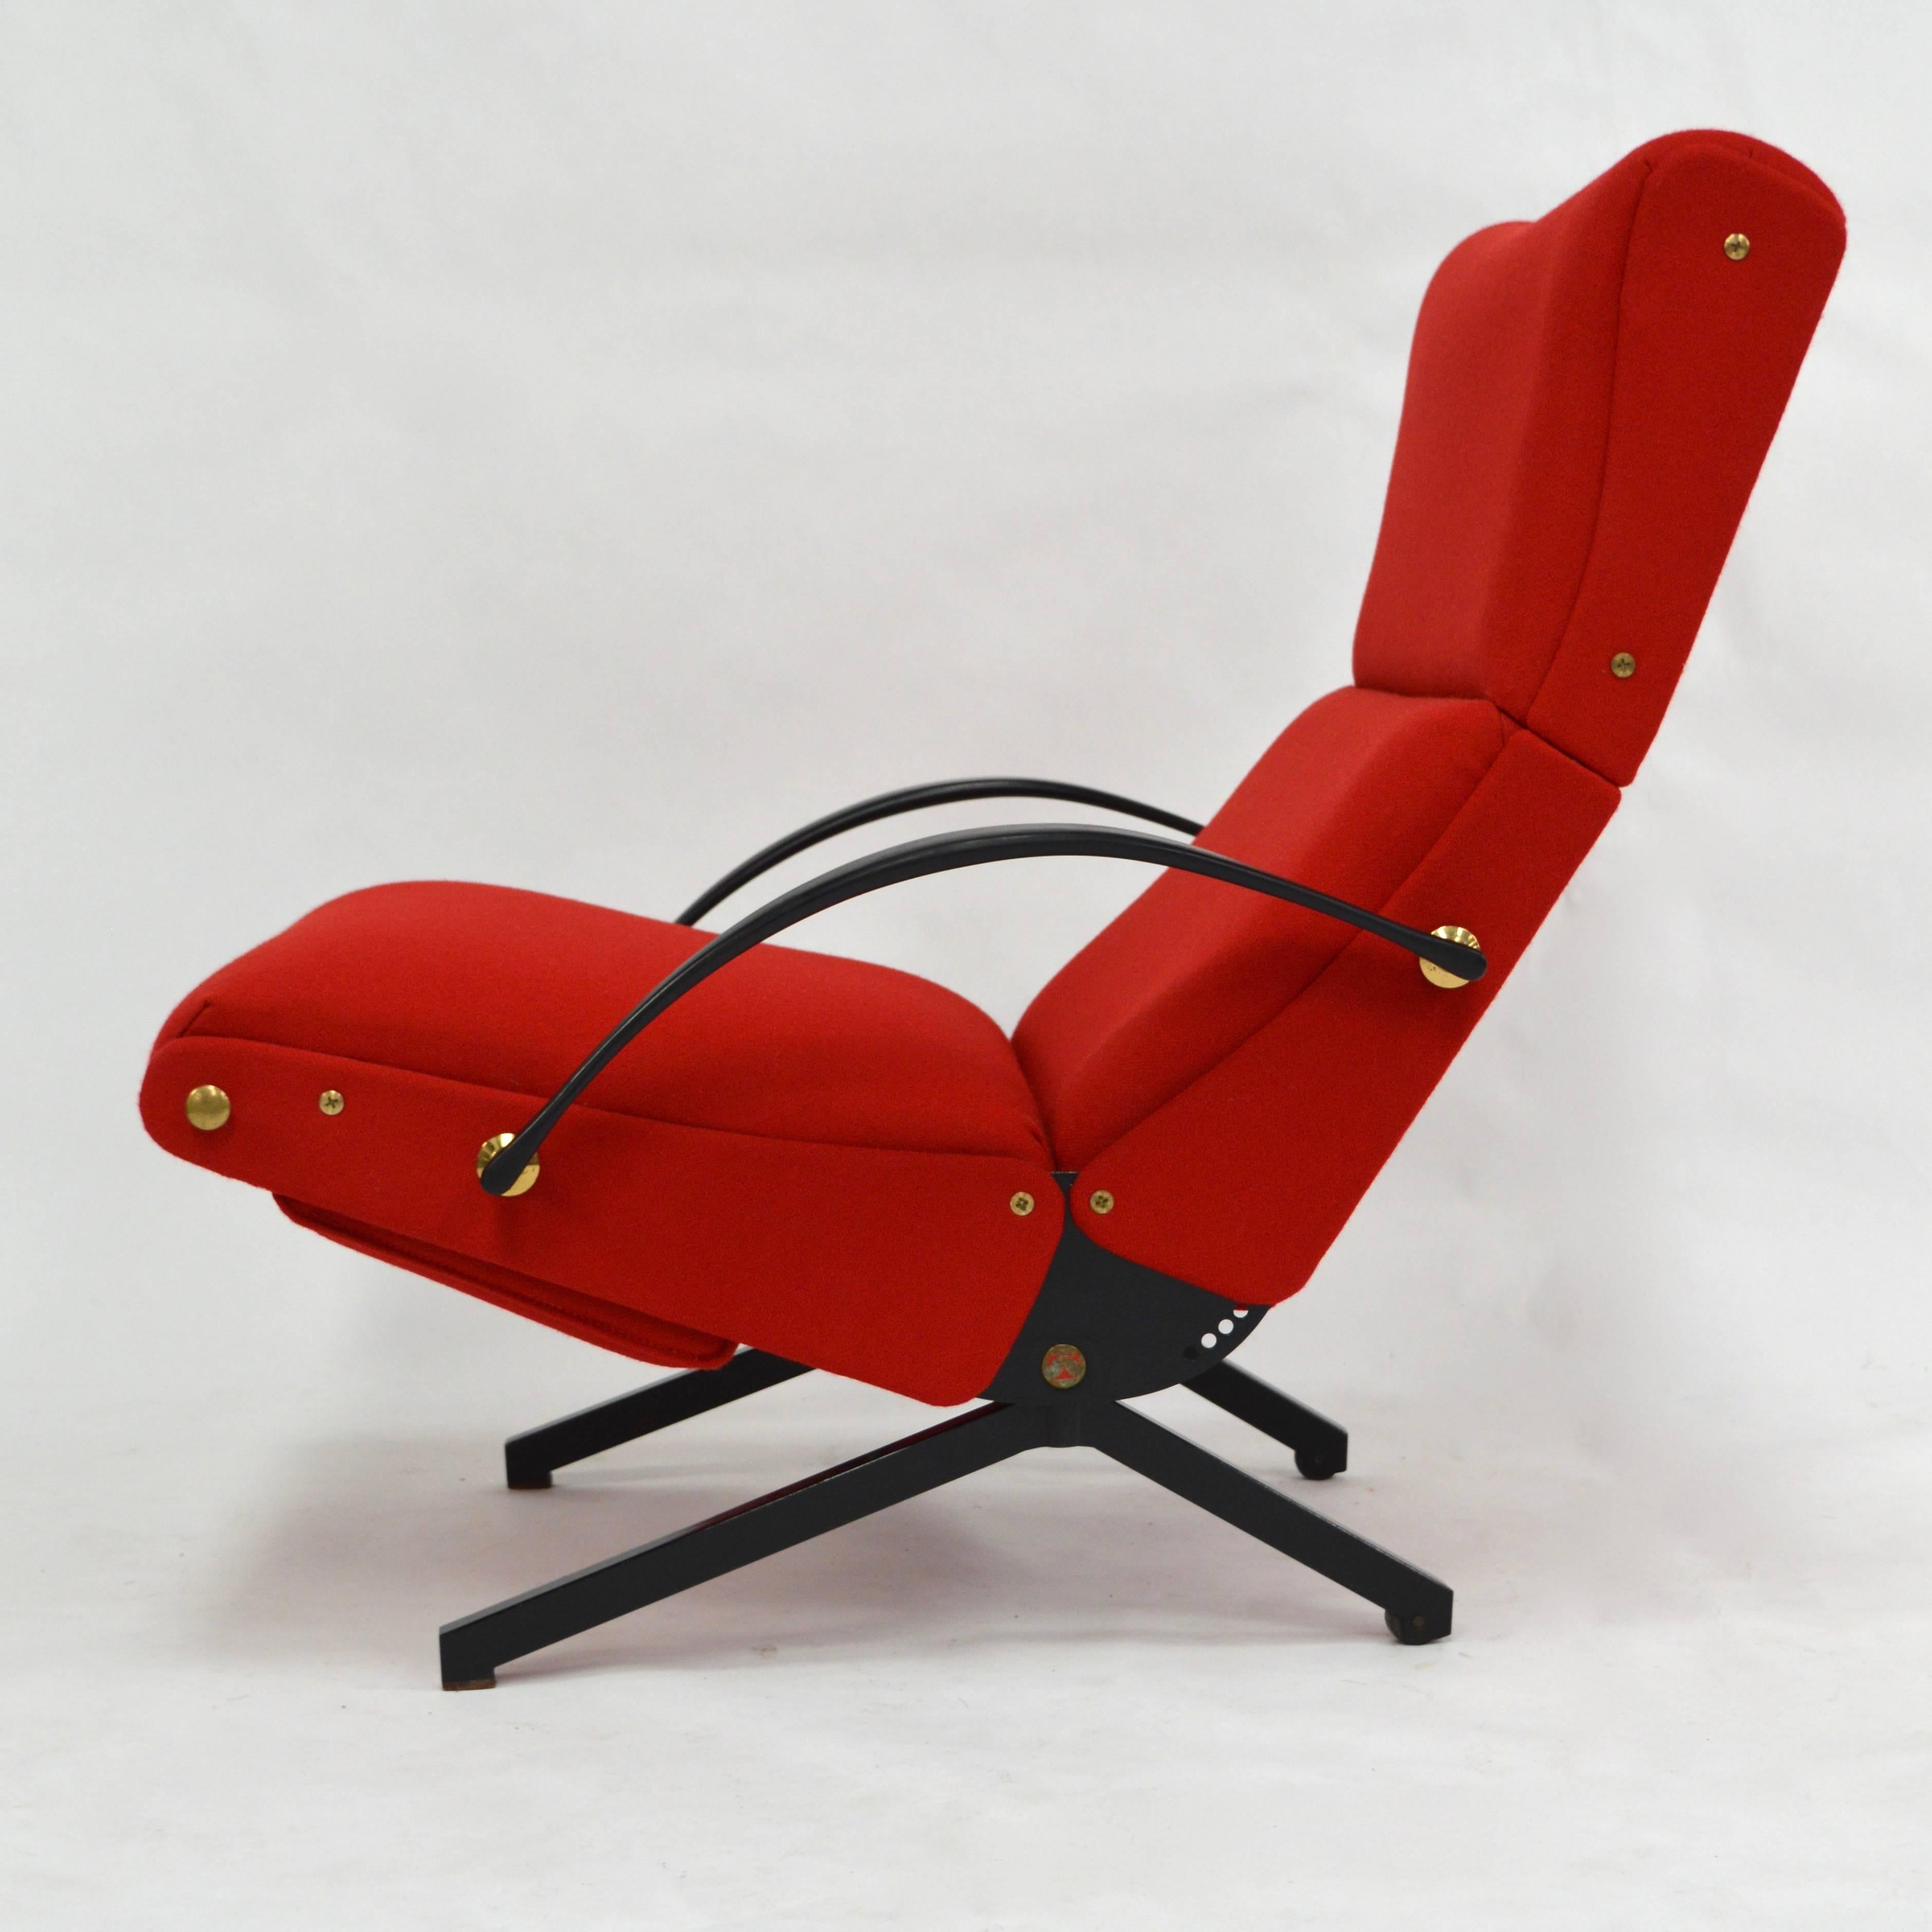 The P40 chair can be adjusted into different positions. The seat, back, foot and headrest can all be adjusted separate from each other.
This chair comes with new original armrests by Tecno, Italy! (Here photographed with used armrests). The fabric